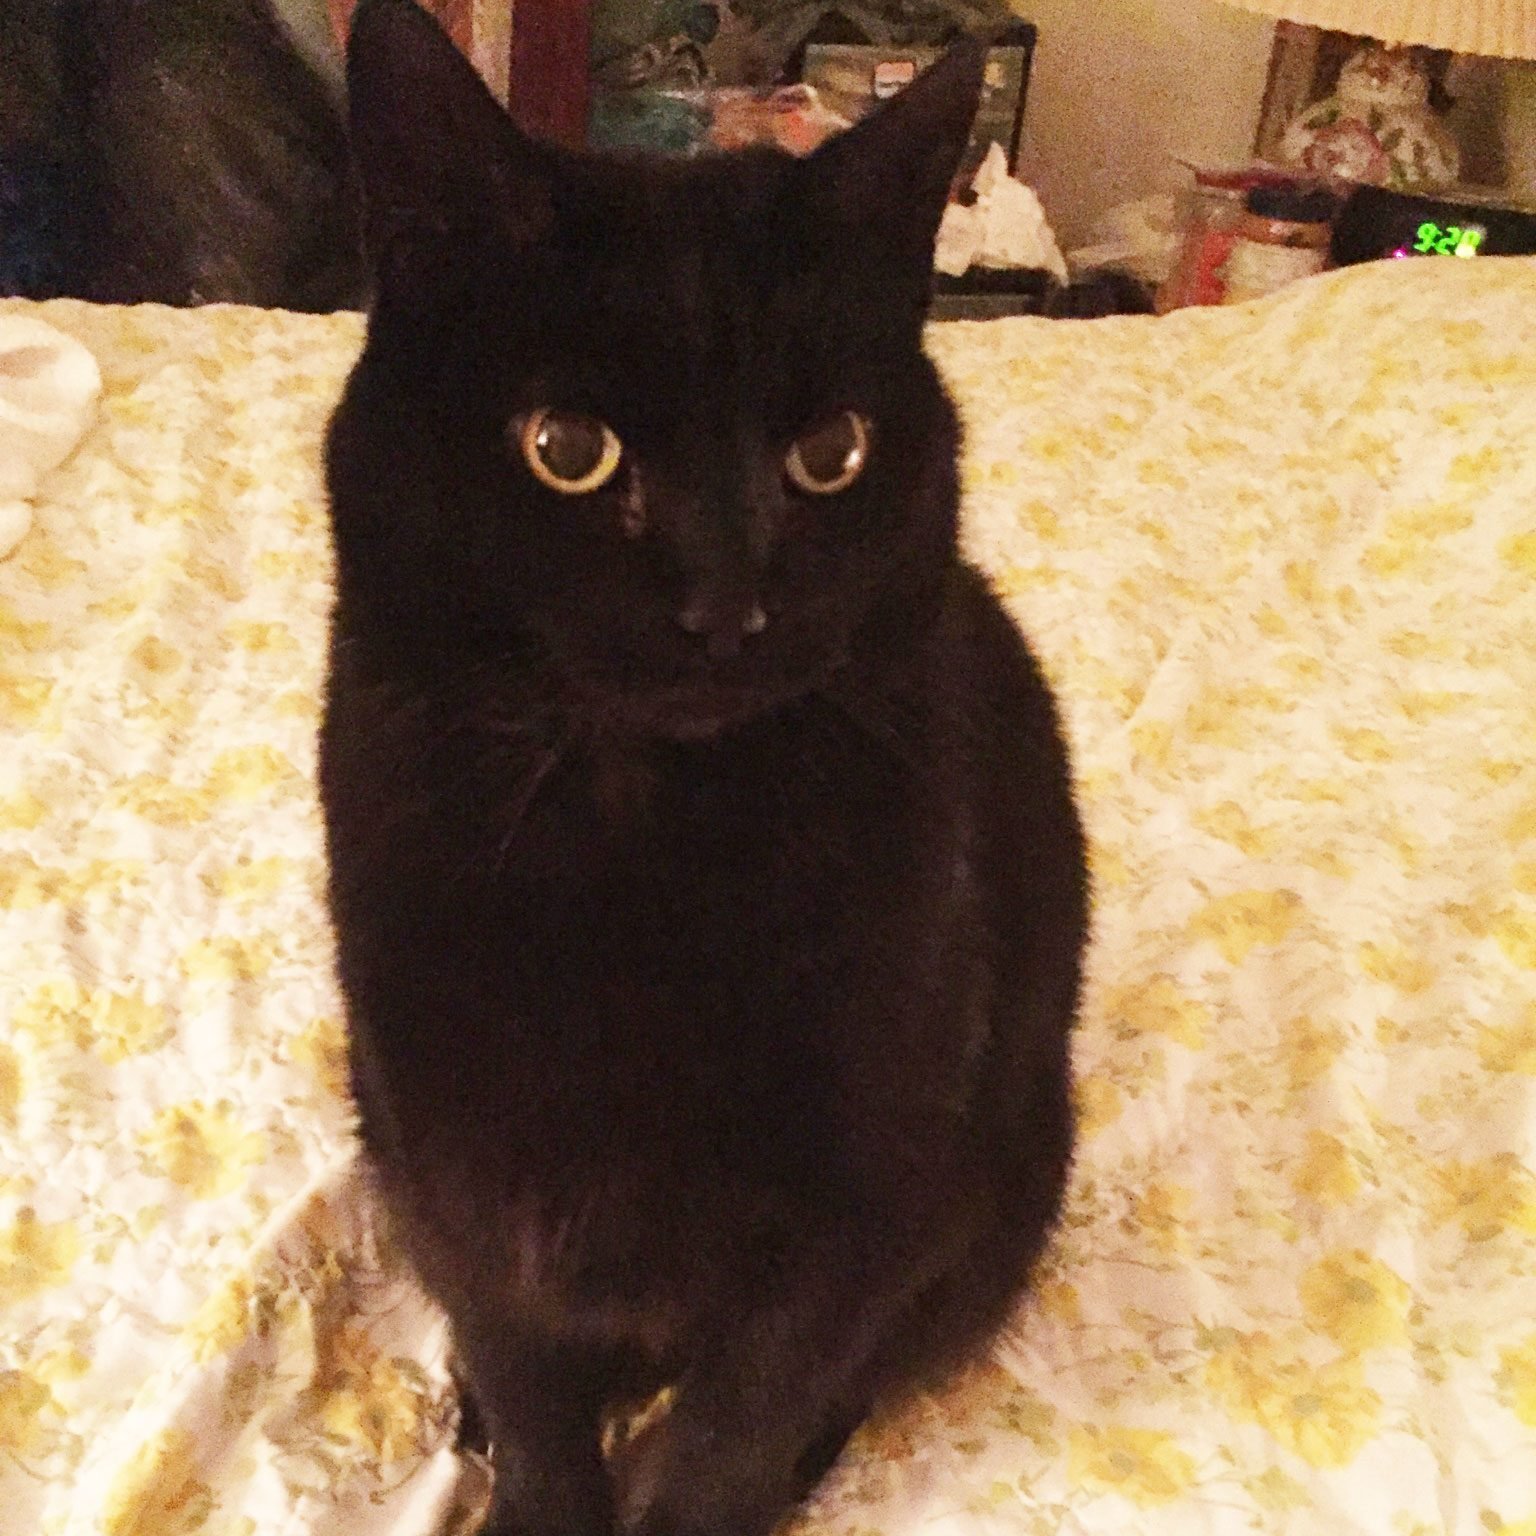 This Guardian Angel Cat Helped Save His Owner from a Life-Threatening Seizure